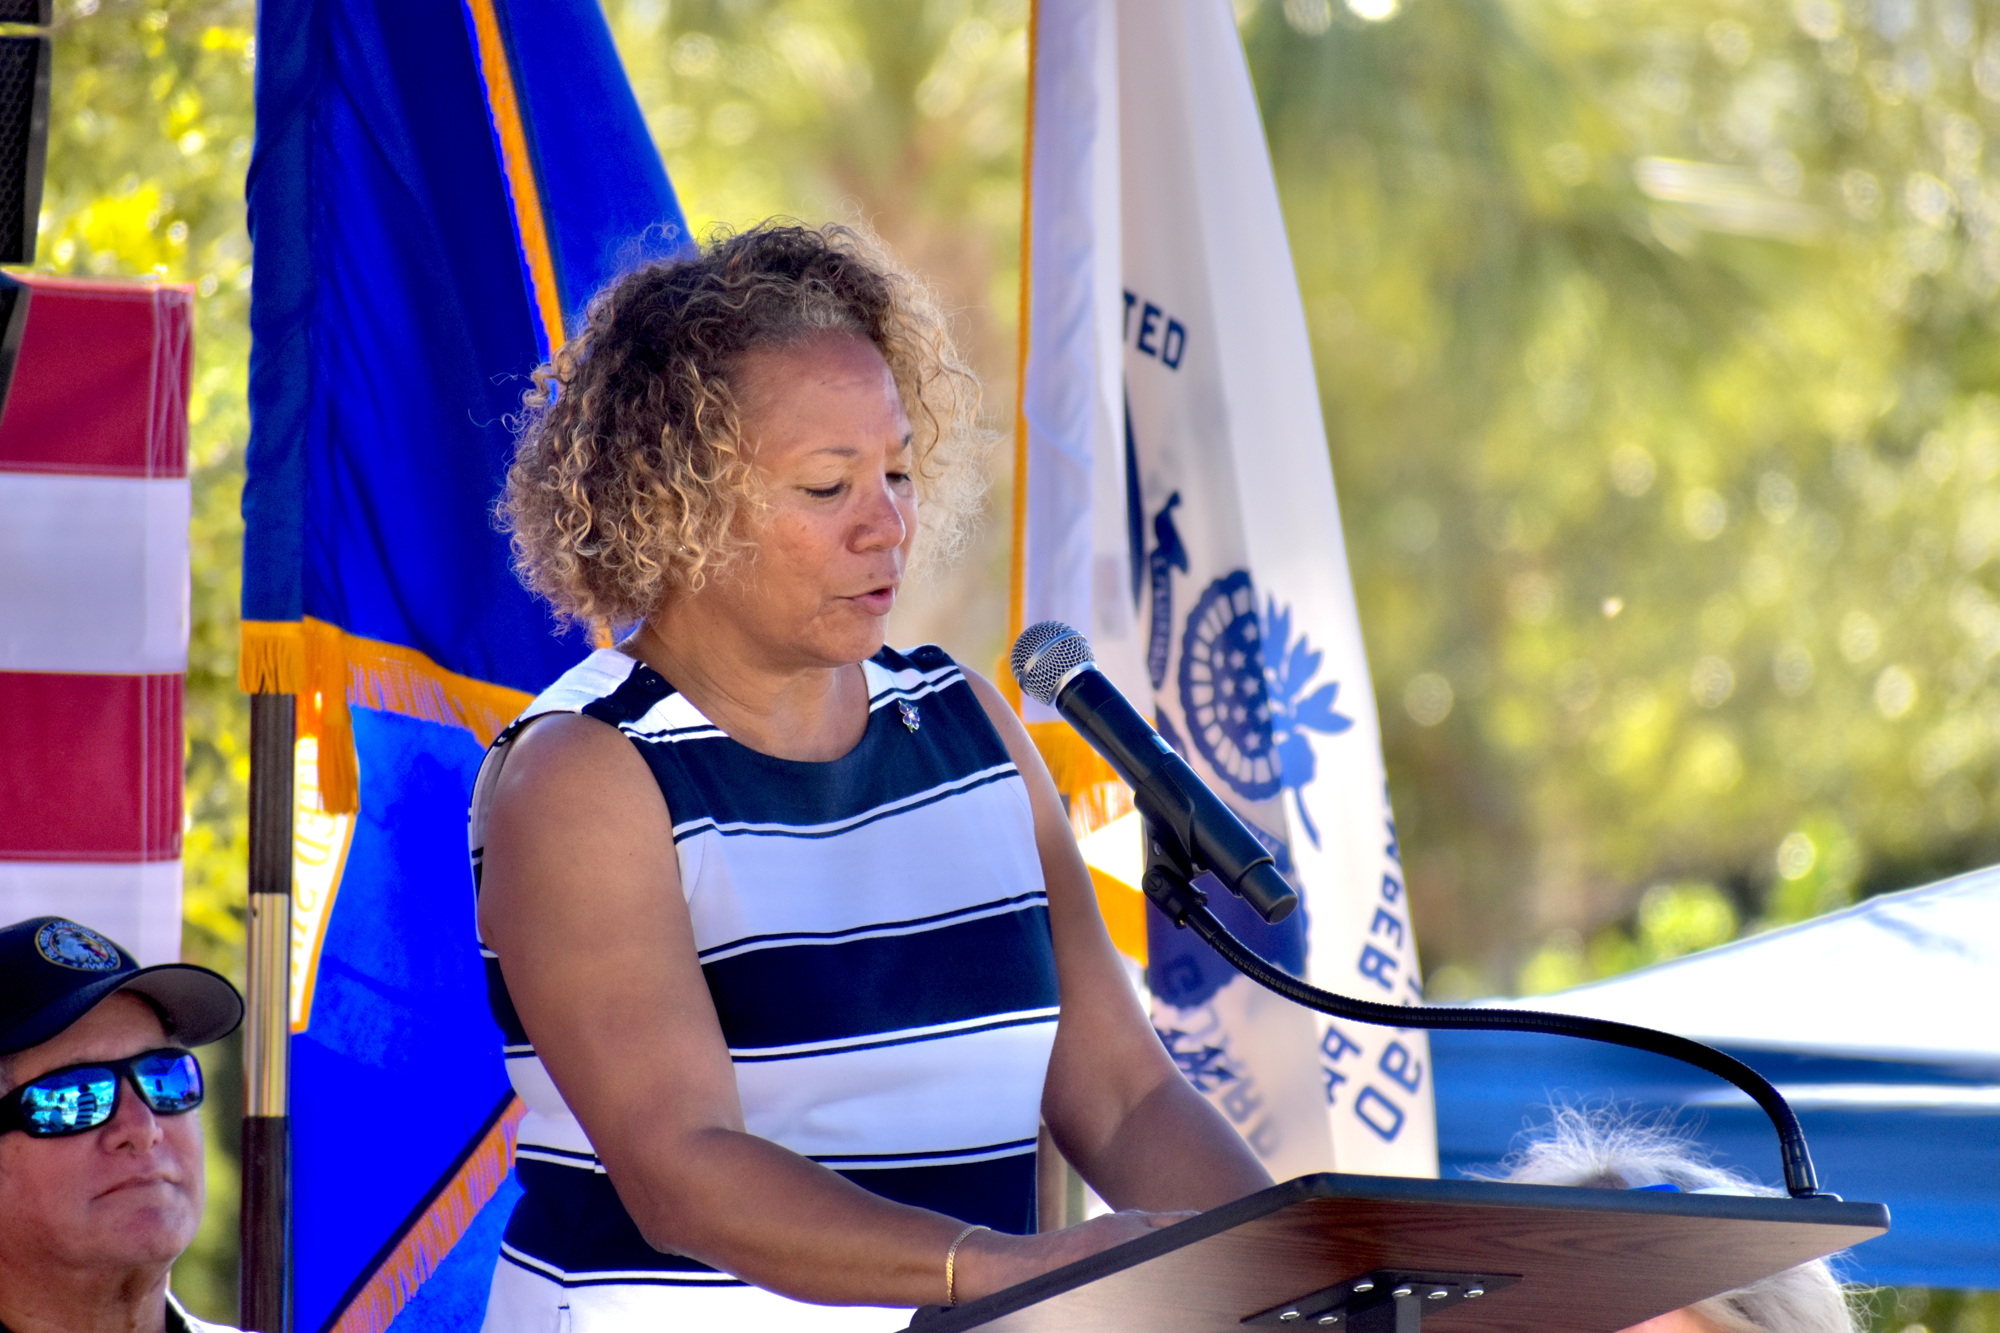 Former battalion commander Marlene Carter speaks at the event. (Photo by Ian Swaby)